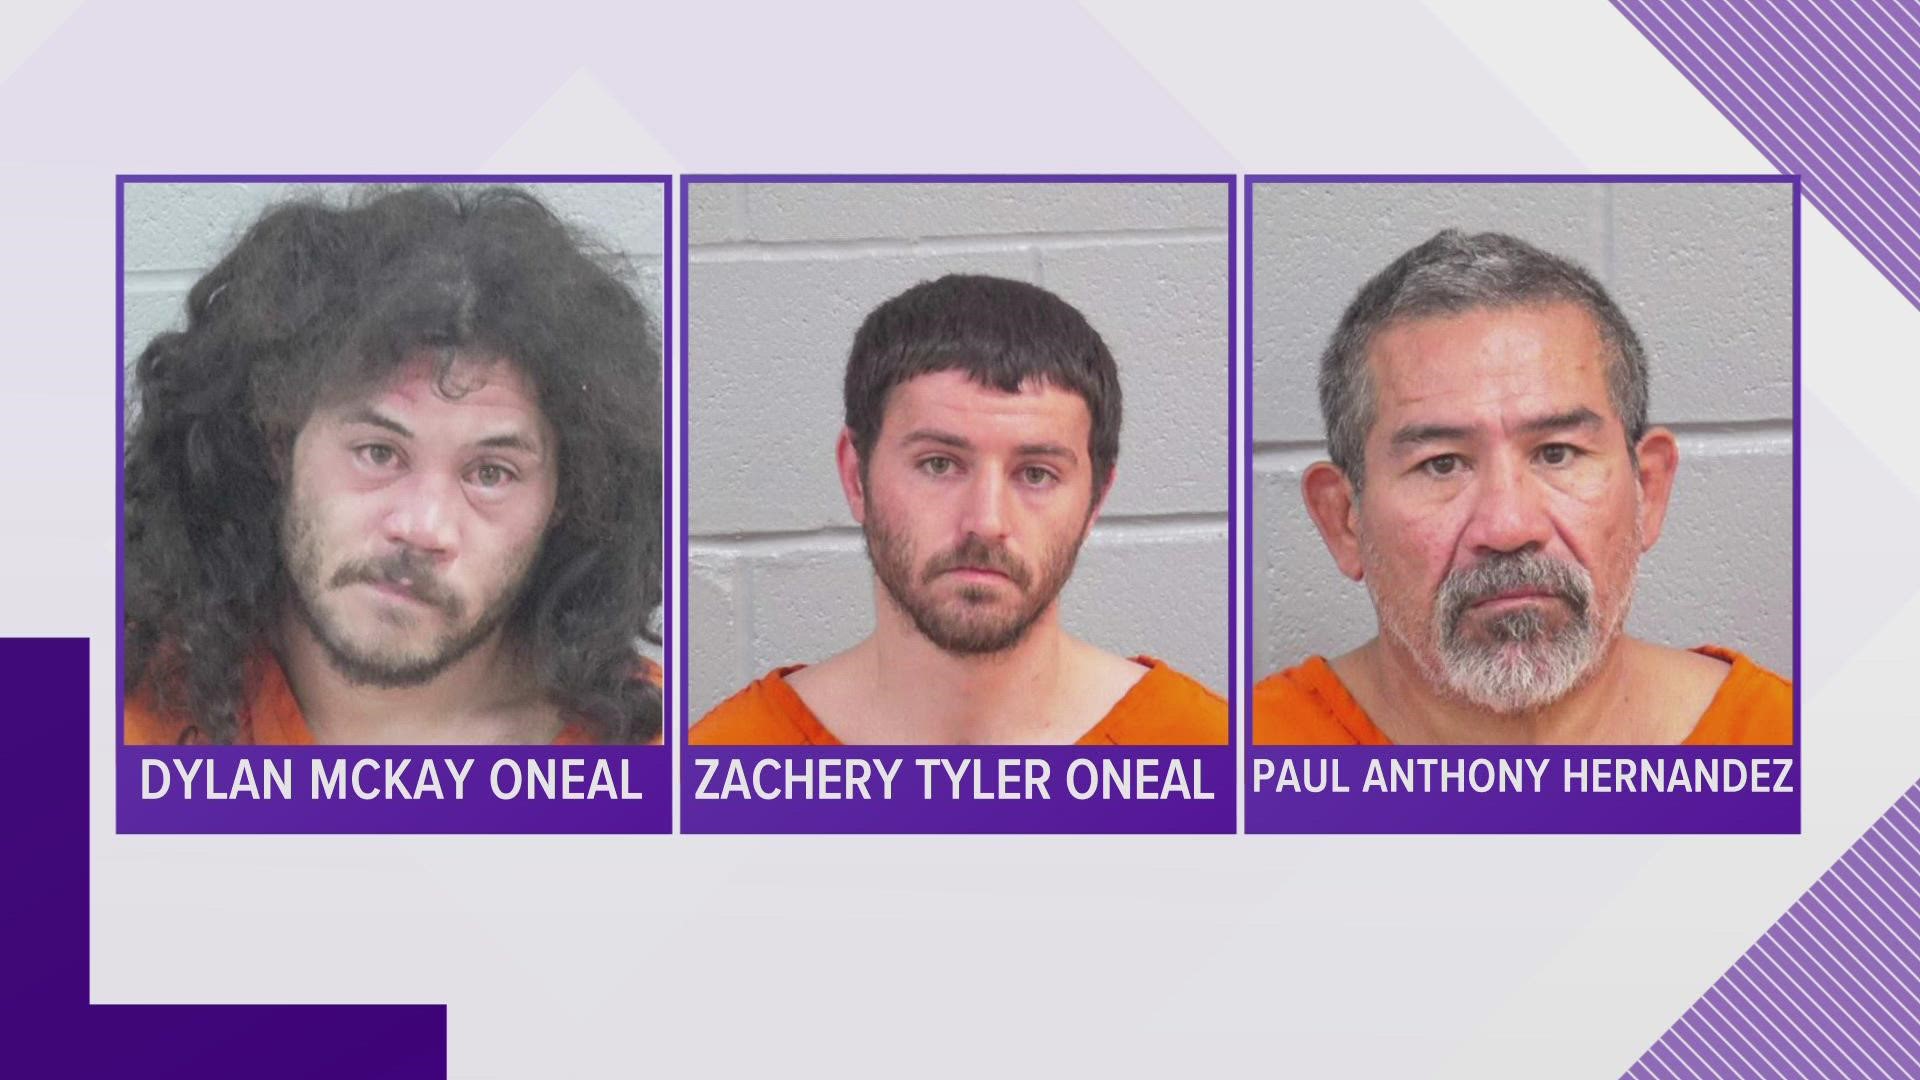 The father of the child, Dylan Mckay Oneal, has been charged with capital murder, while the other two individuals have been charged with hindering apprehension.